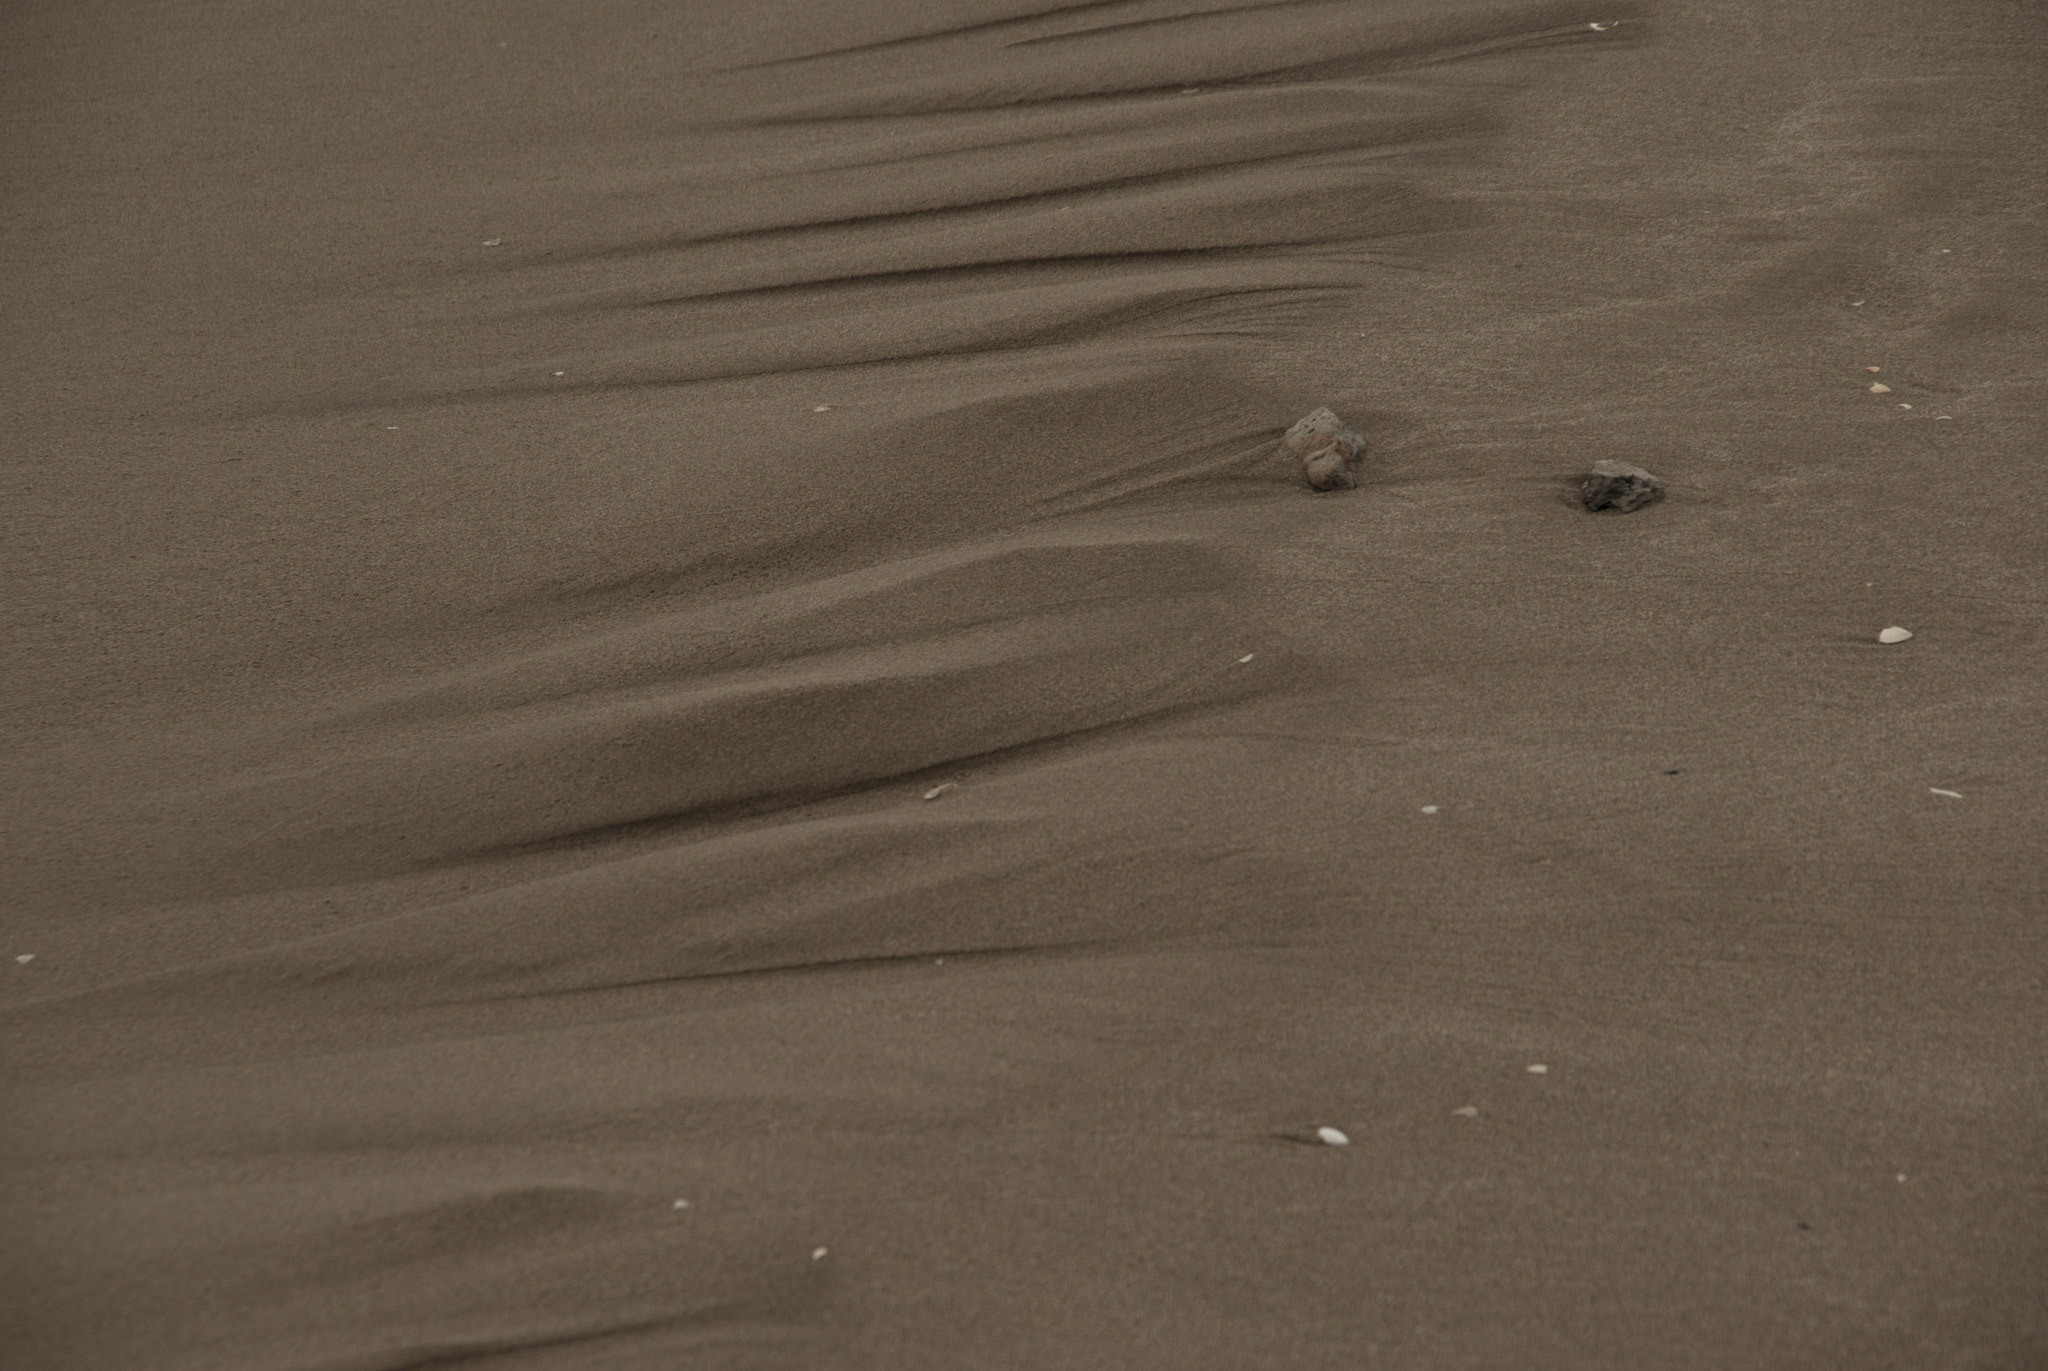 Pentax K10D + Sigma sample photo. Small dunes in sand photography